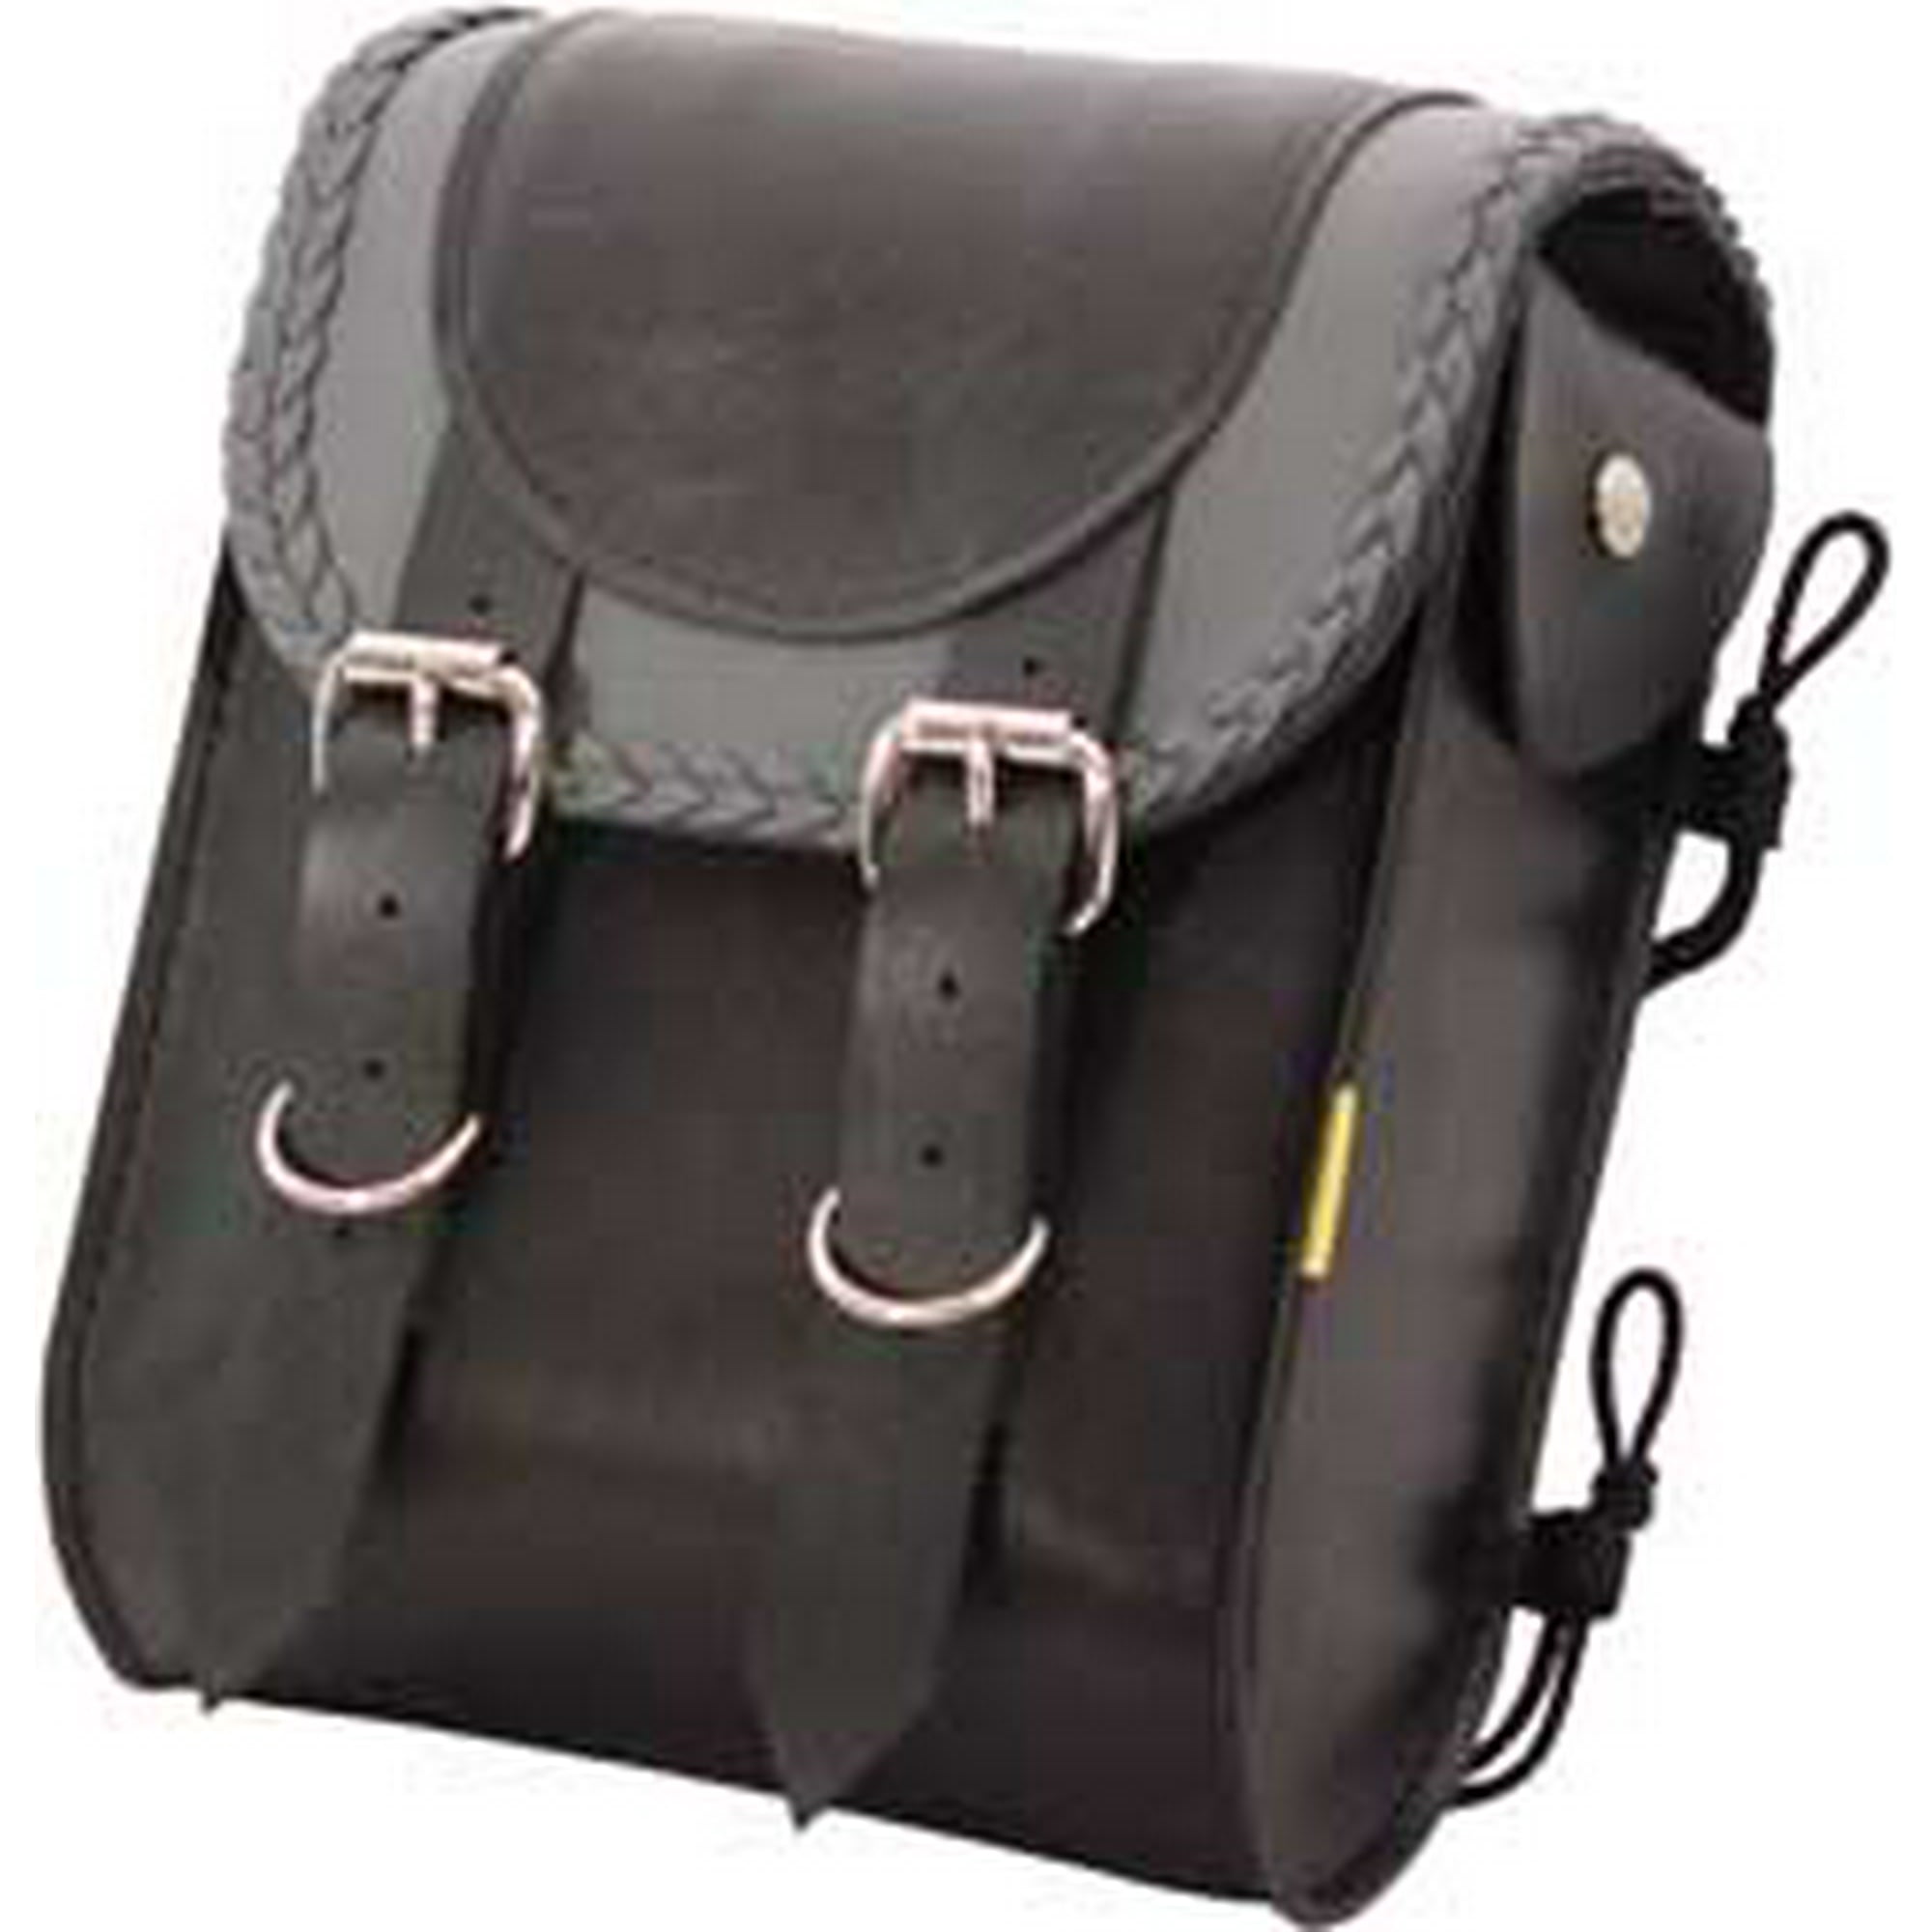 Willie & Max Leather Tool Bag